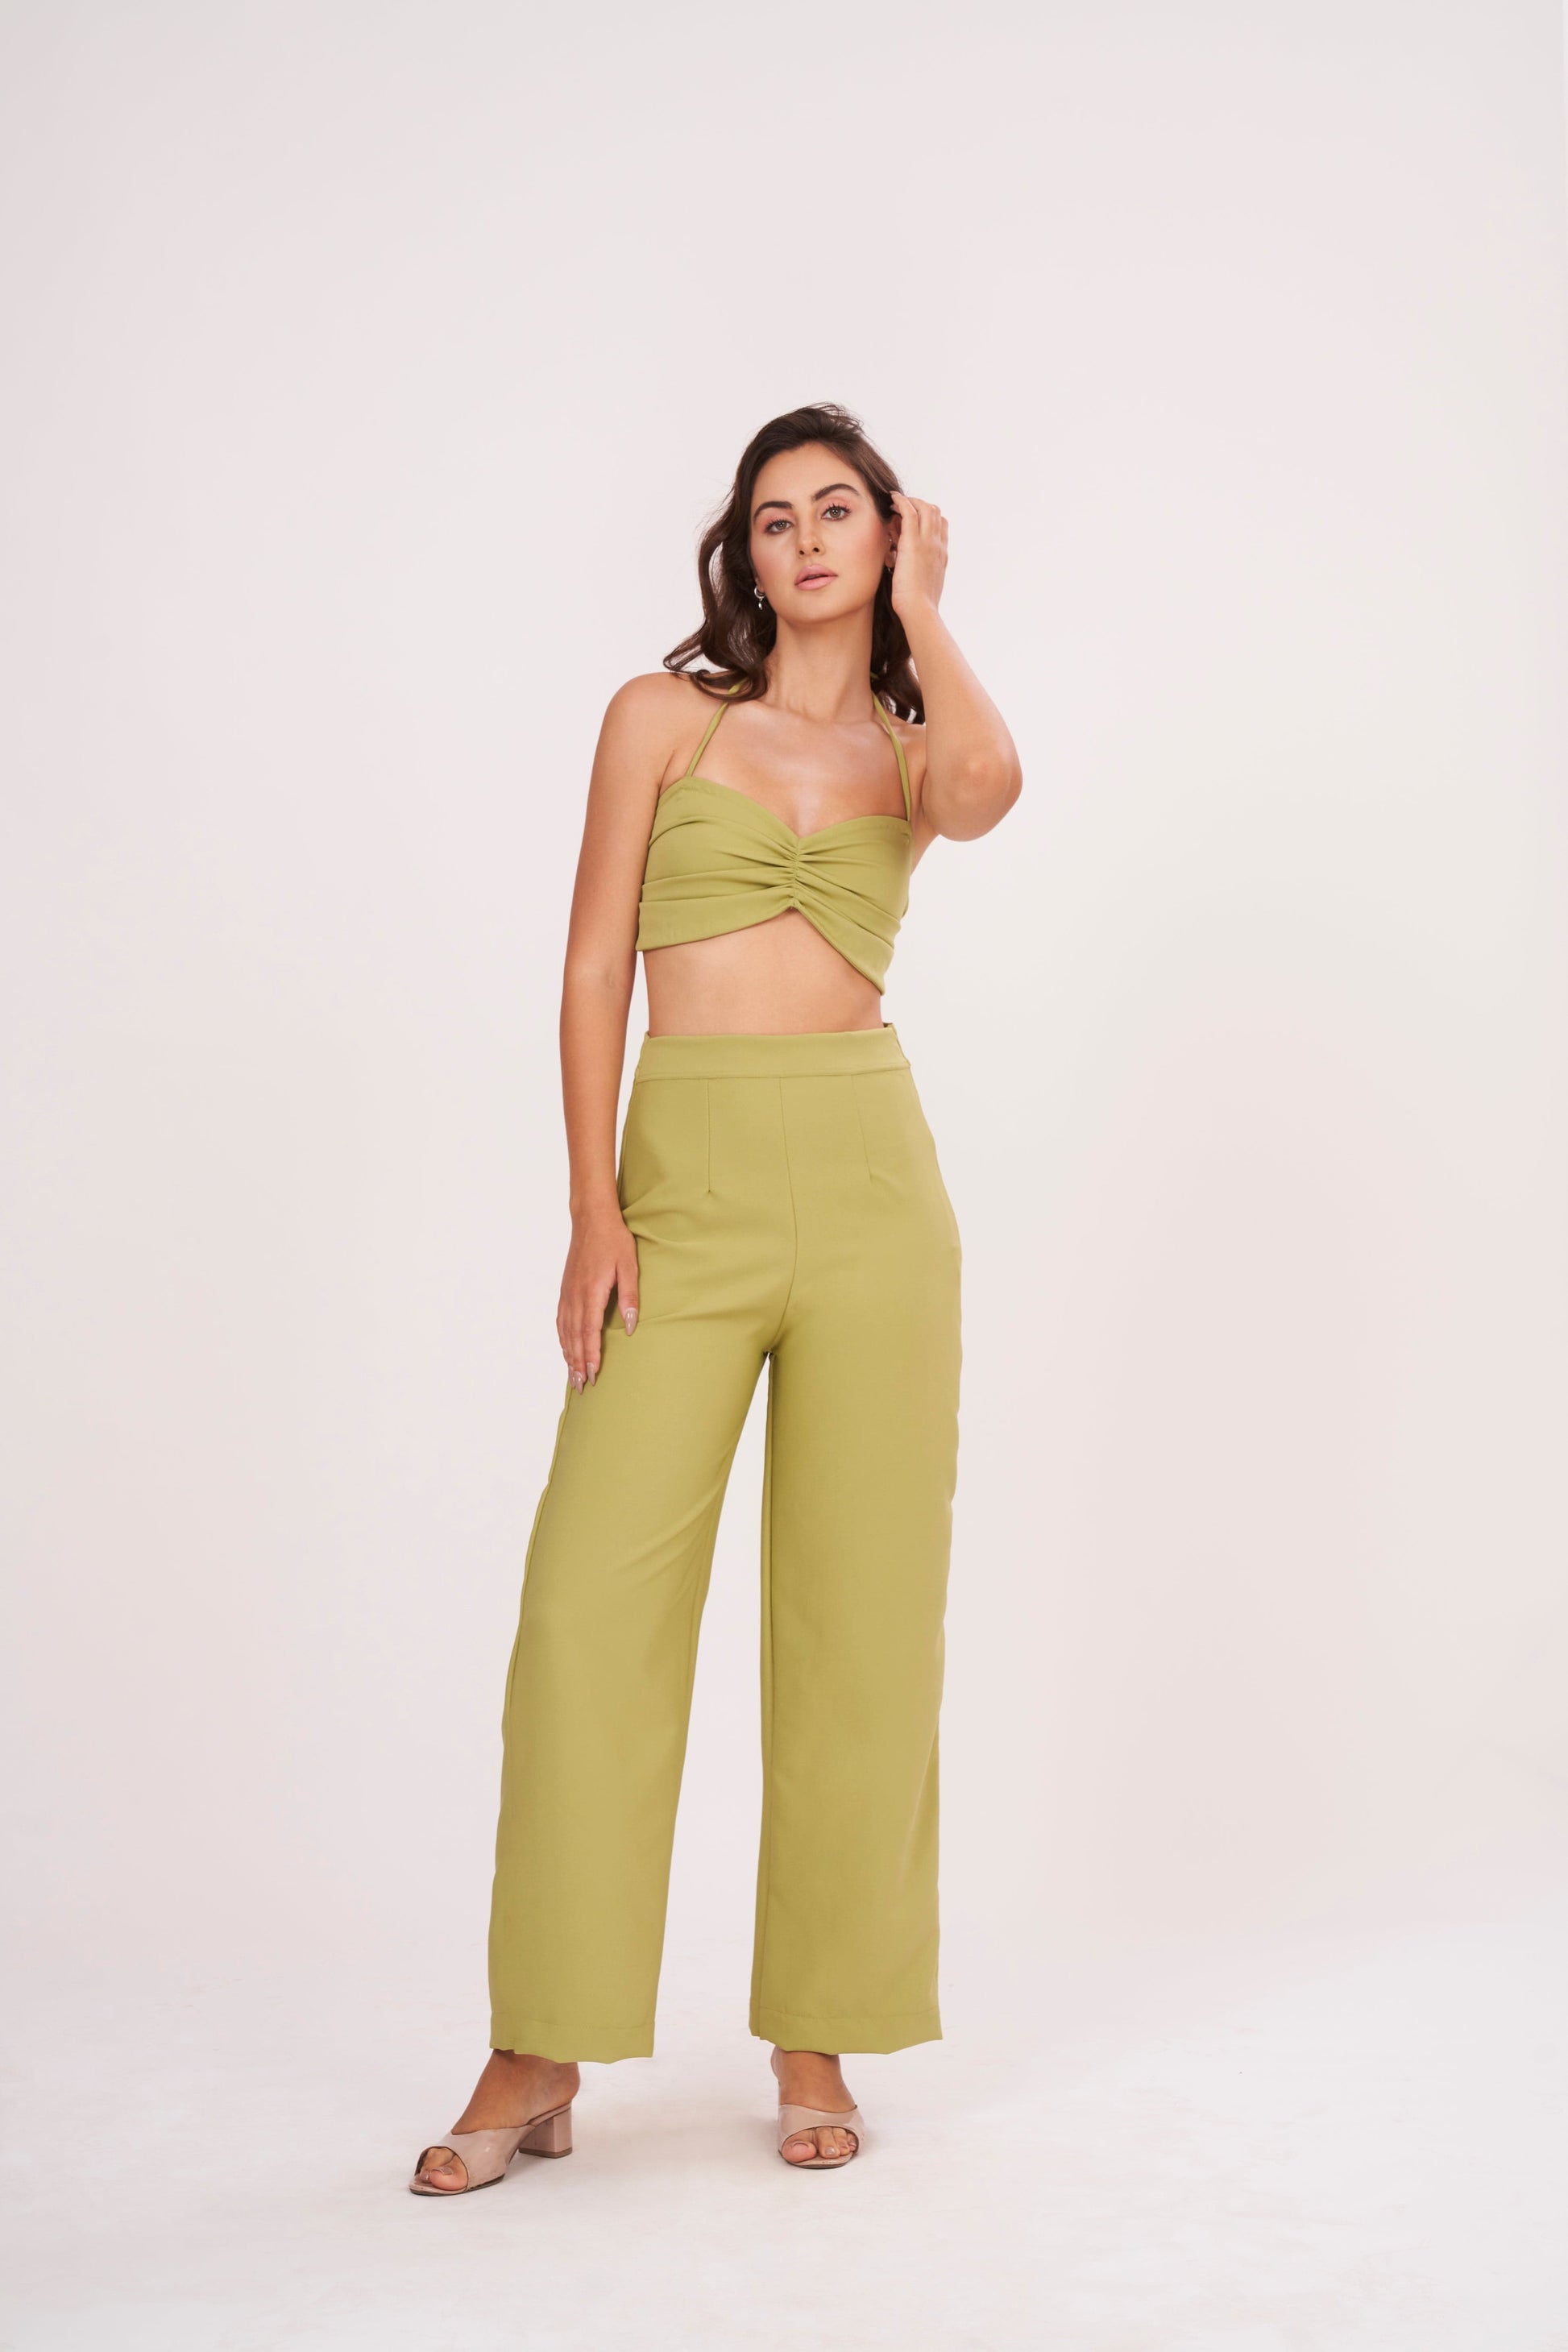 Elegant green halter neck bralette with ruched detailing and tie-up closure, part of a chic co-ord set for confidence and style.